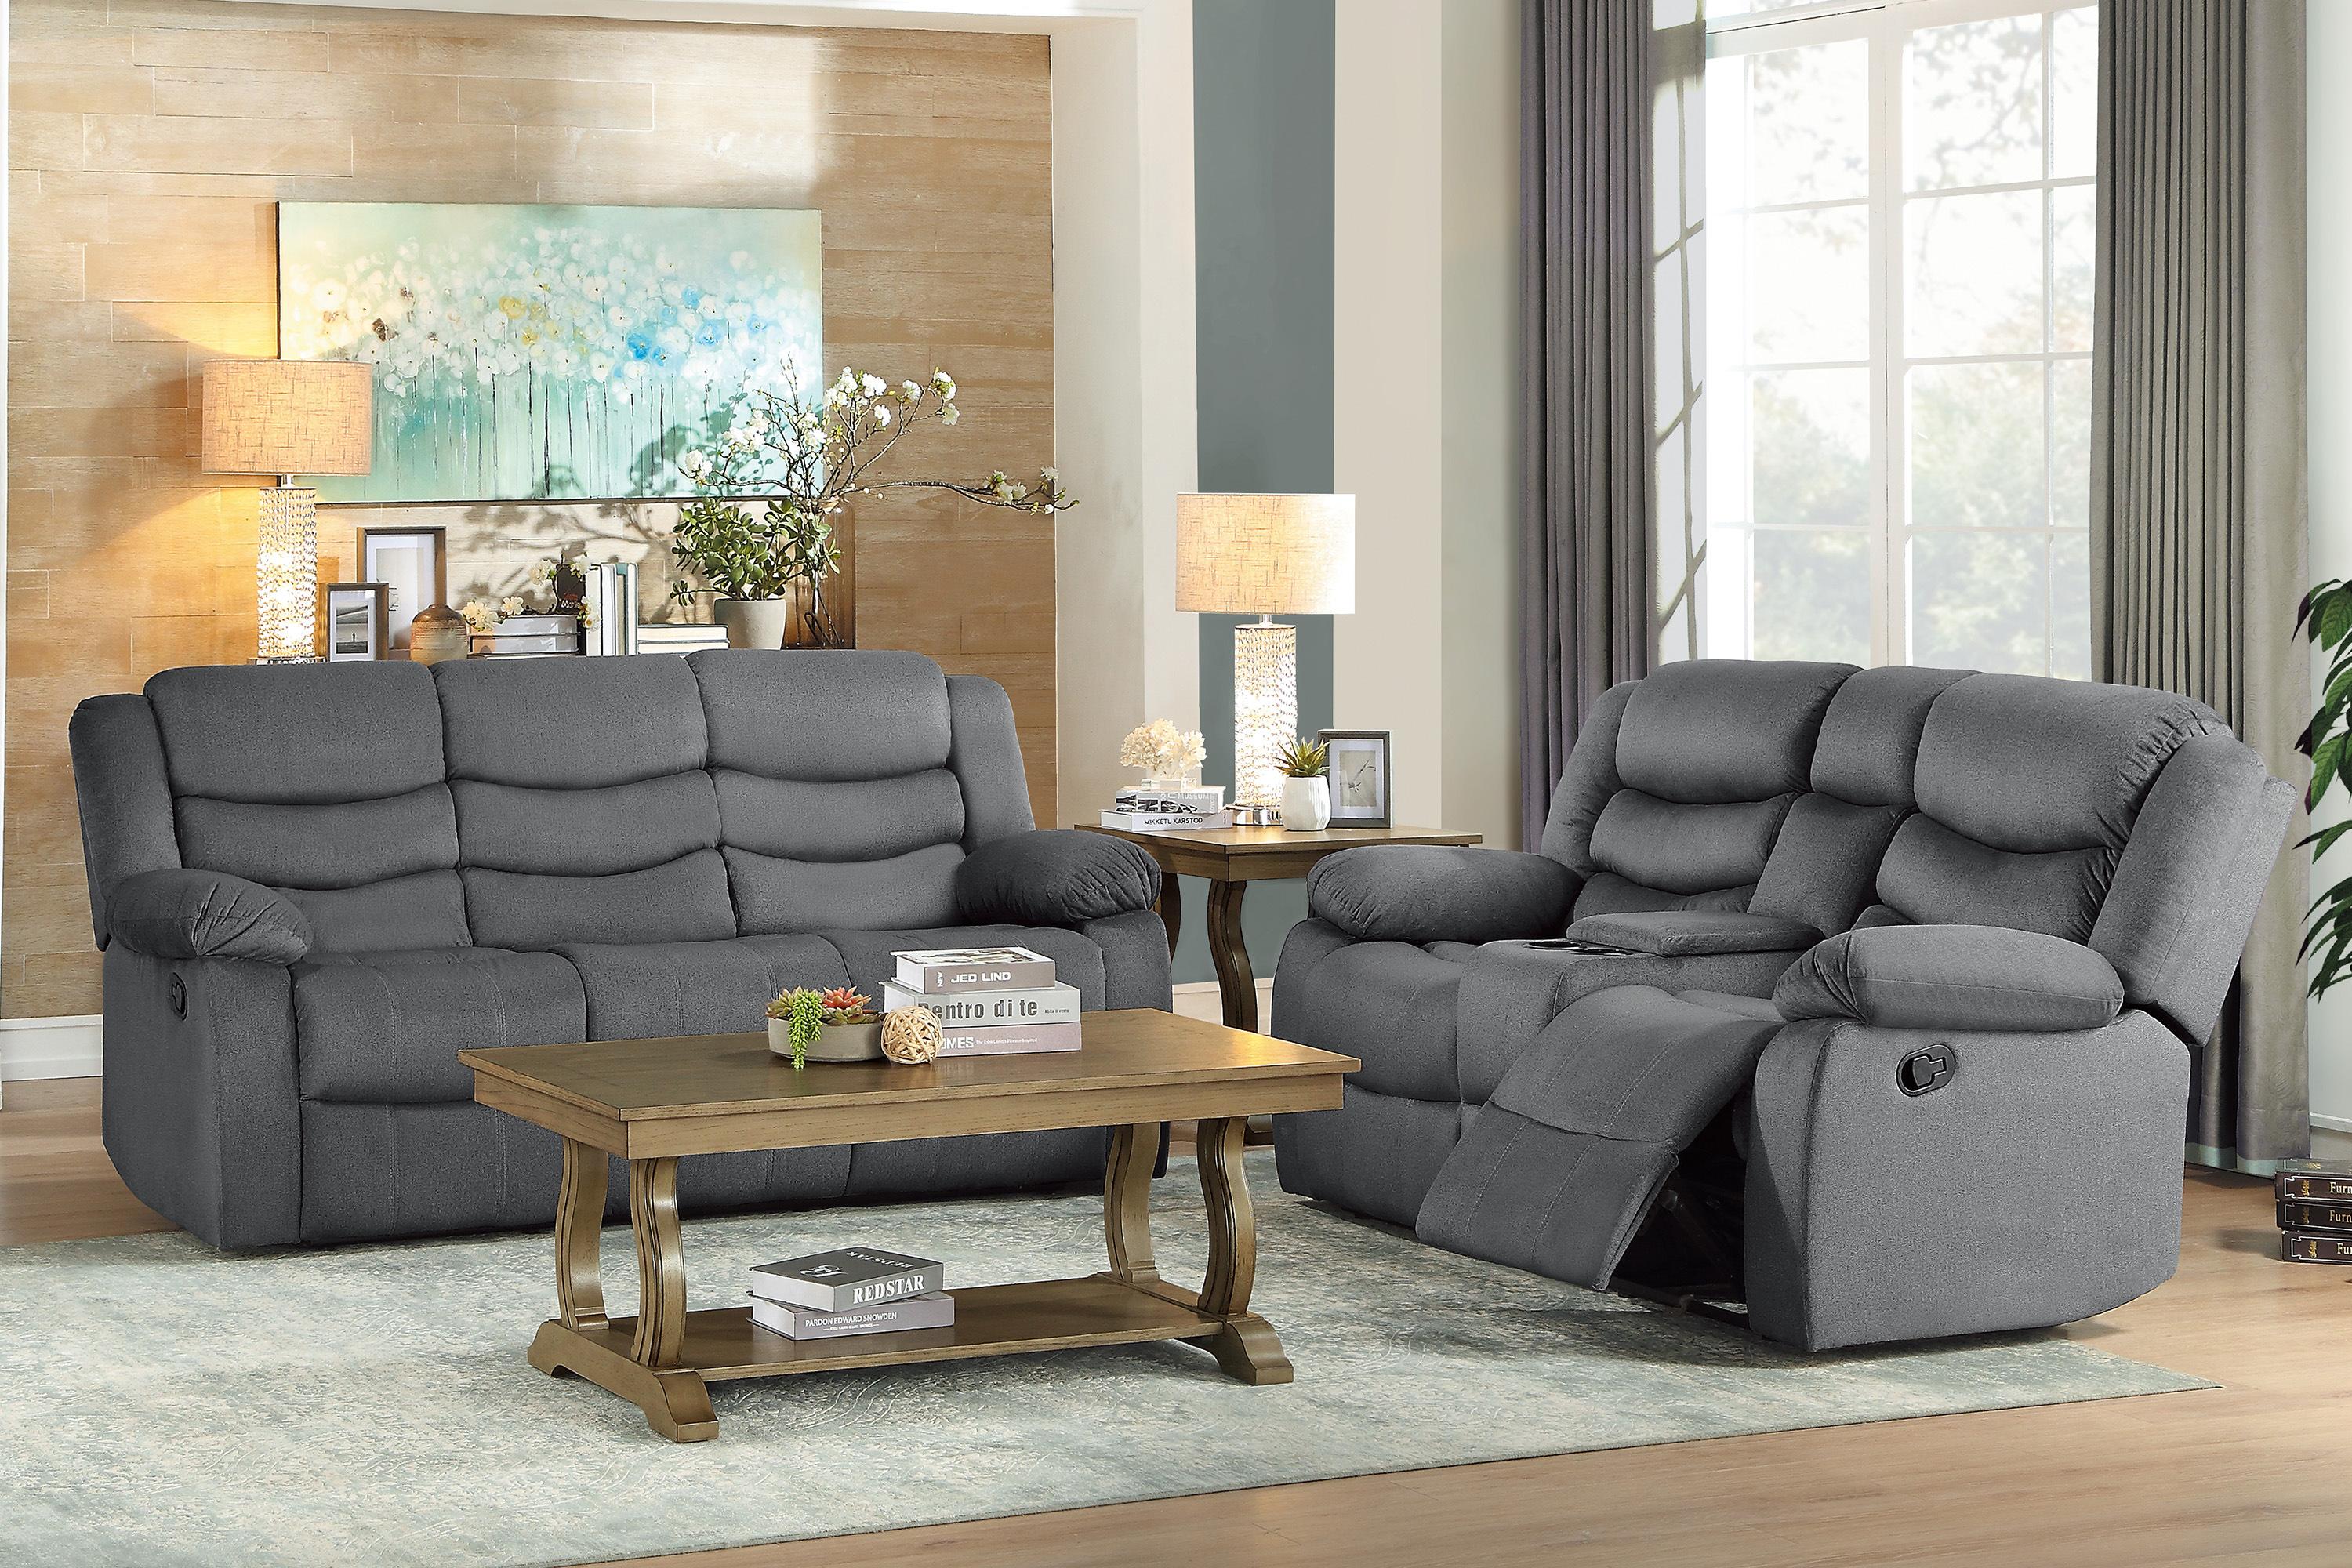 Transitional Reclining Sofa Set 9526GY-2PC Discus 9526GY-2PC in Gray Microfiber